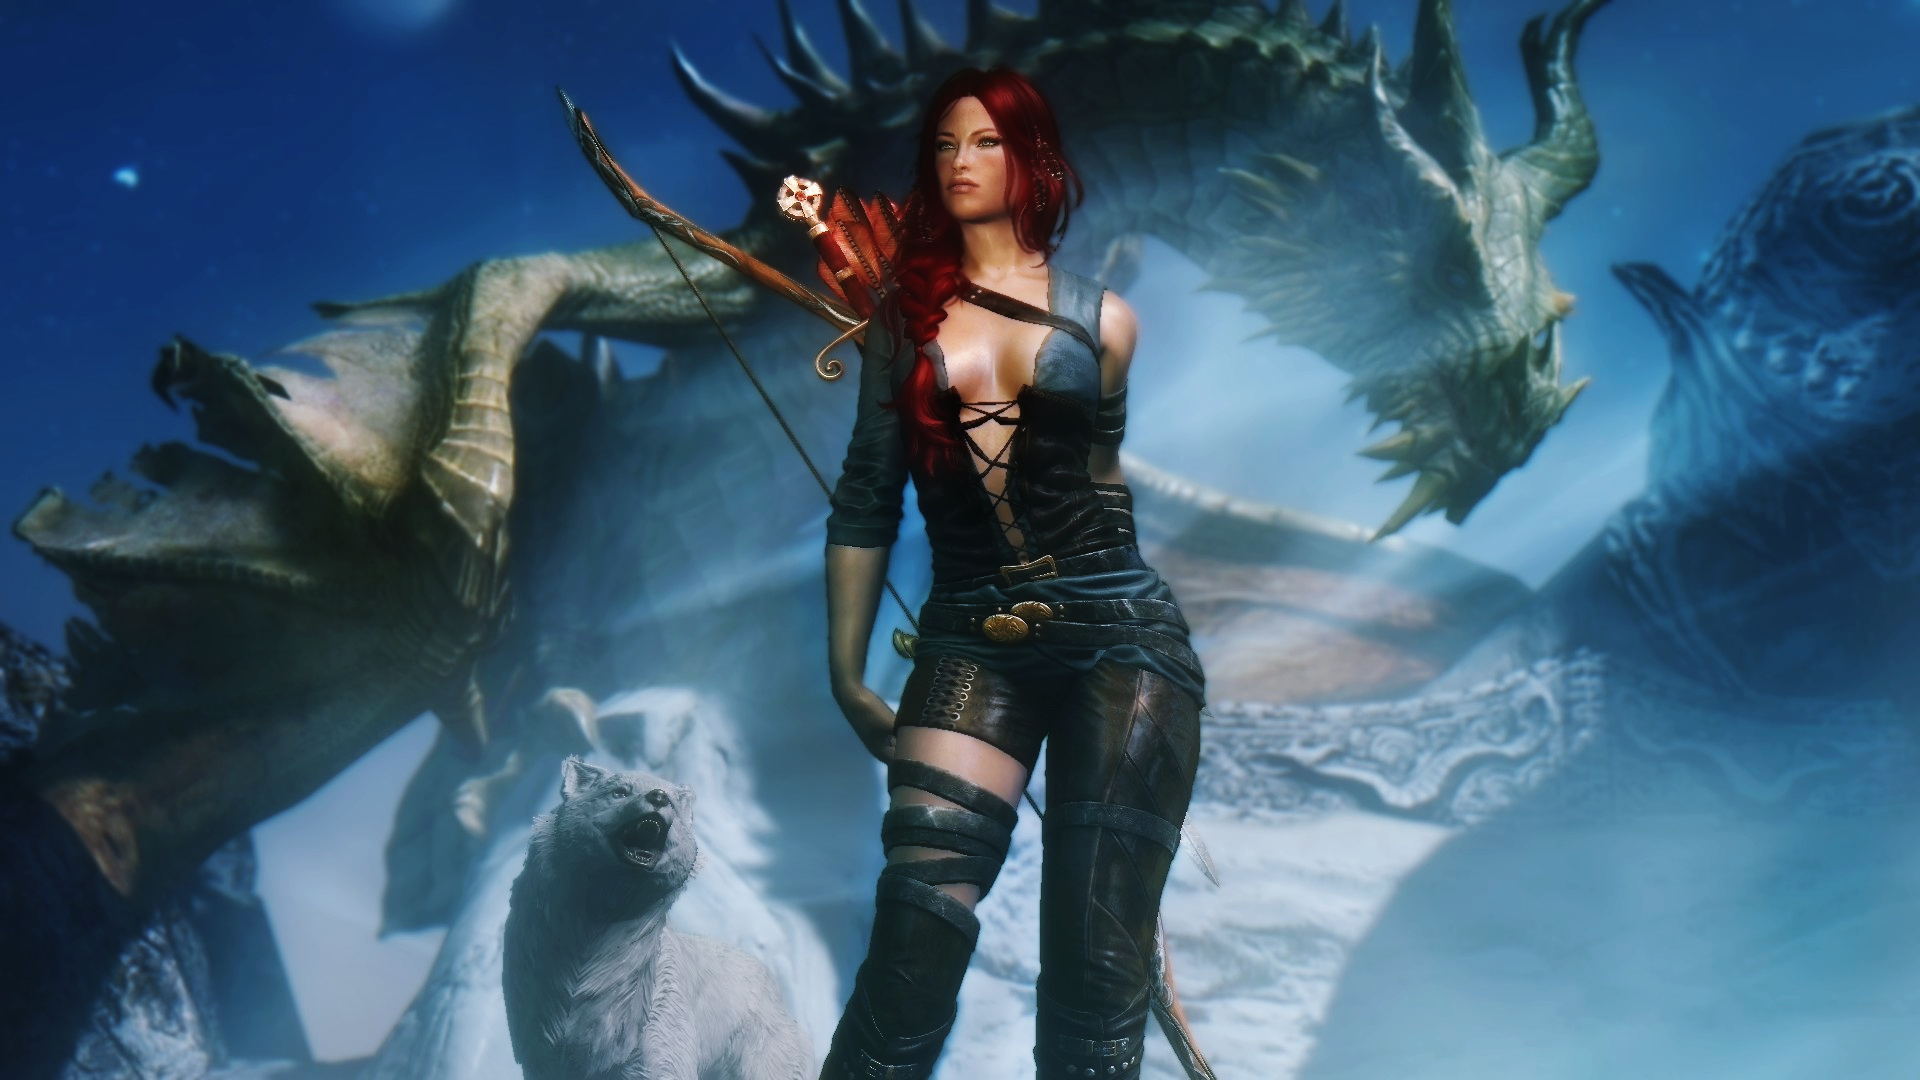 General 1920x1080 The Elder Scrolls V: Skyrim dragon wolf fantasy girl women RPG video games PC gaming redhead video game art fantasy art video game girls creature boobs cleavage bow standing looking into the distance